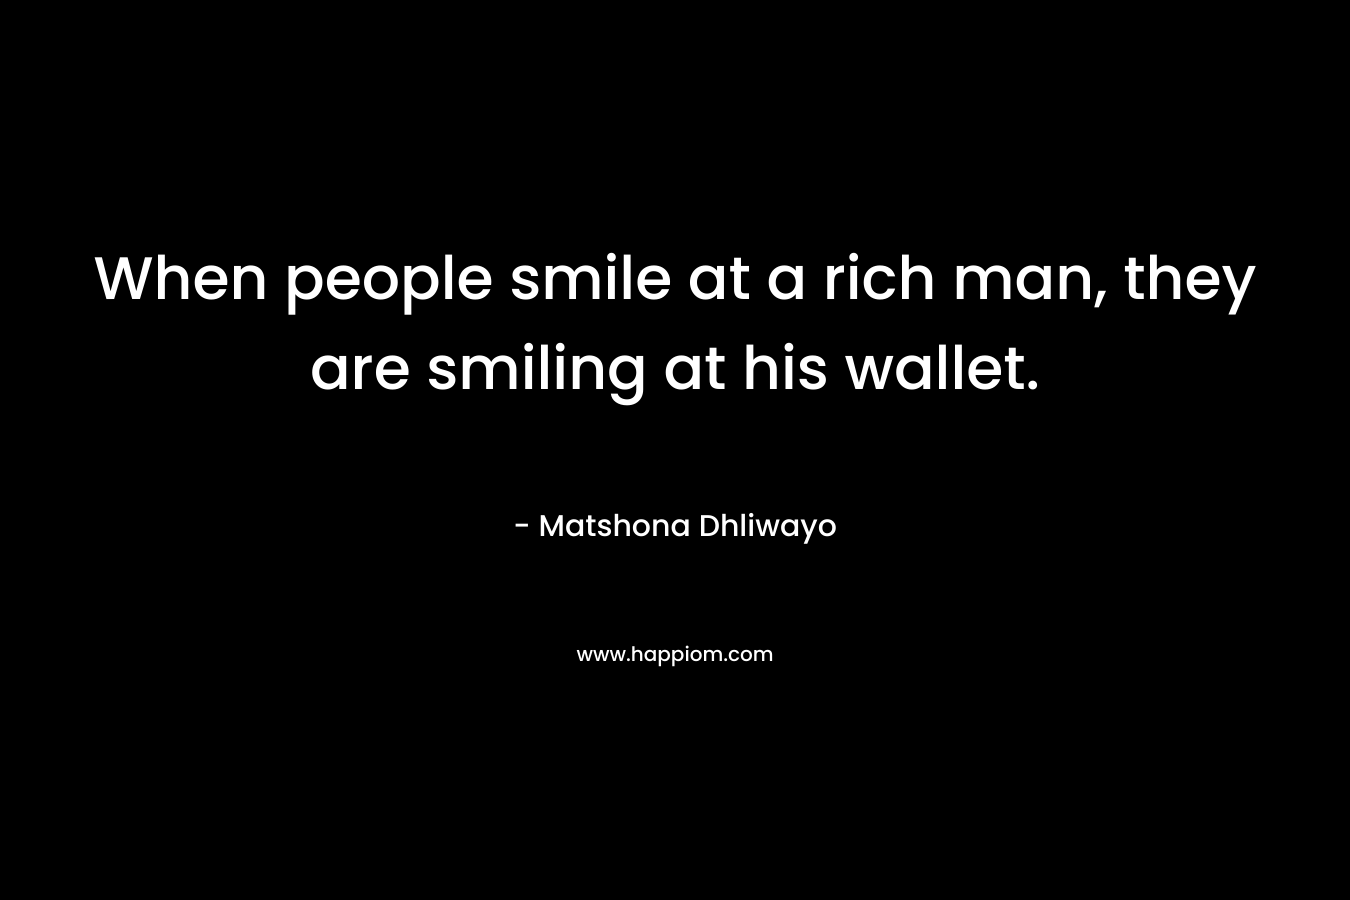 When people smile at a rich man, they are smiling at his wallet.